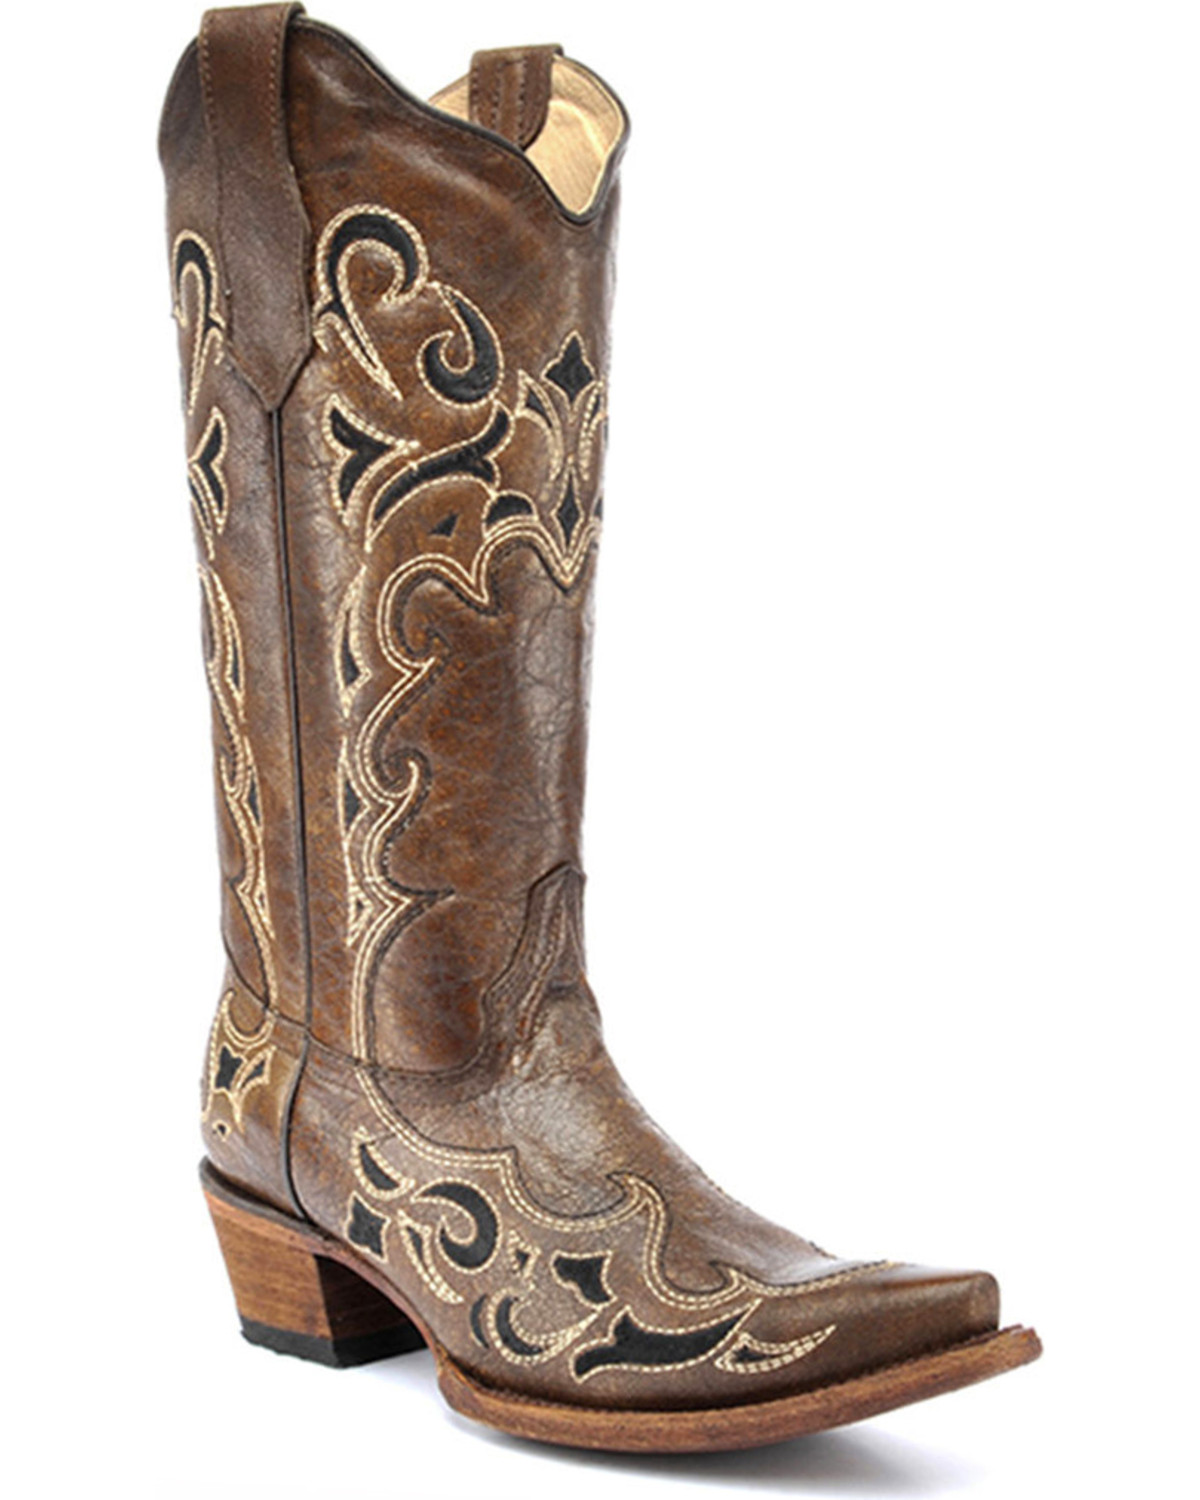 circle g embroidered cowboy boot